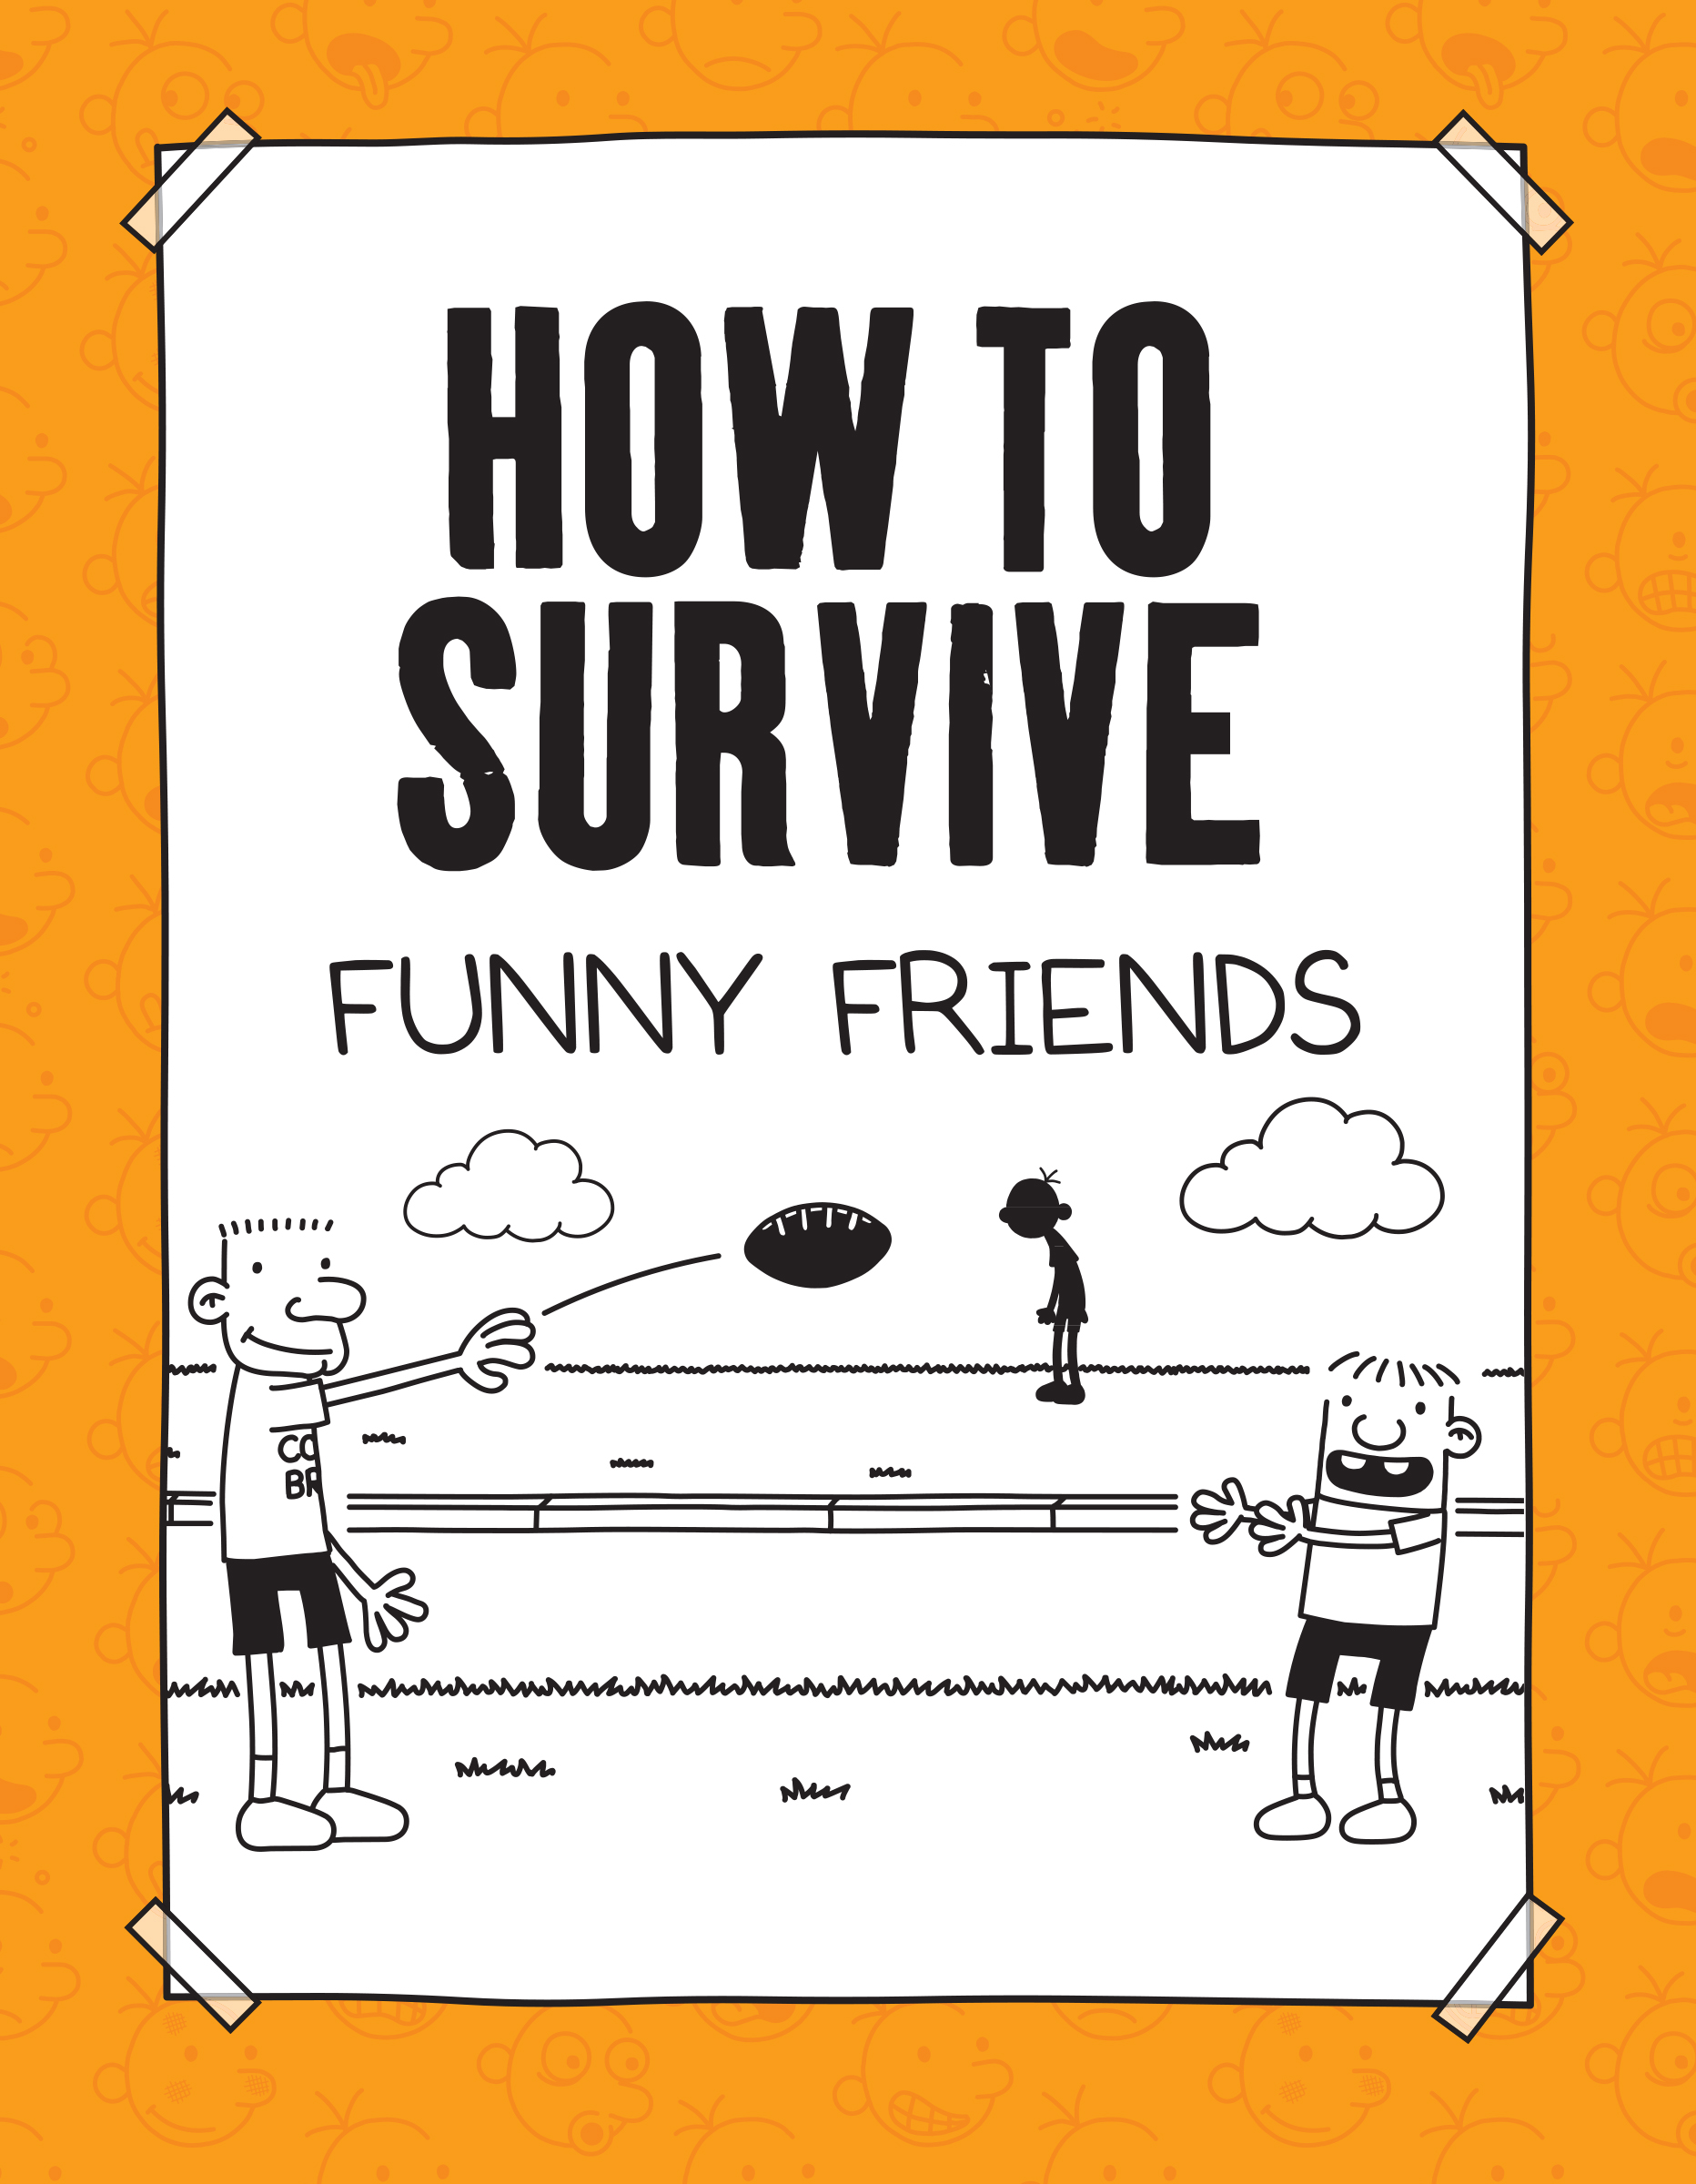 Diary of a Wimpy Kid: How to Survive Funny Friends - a book on Funbrain